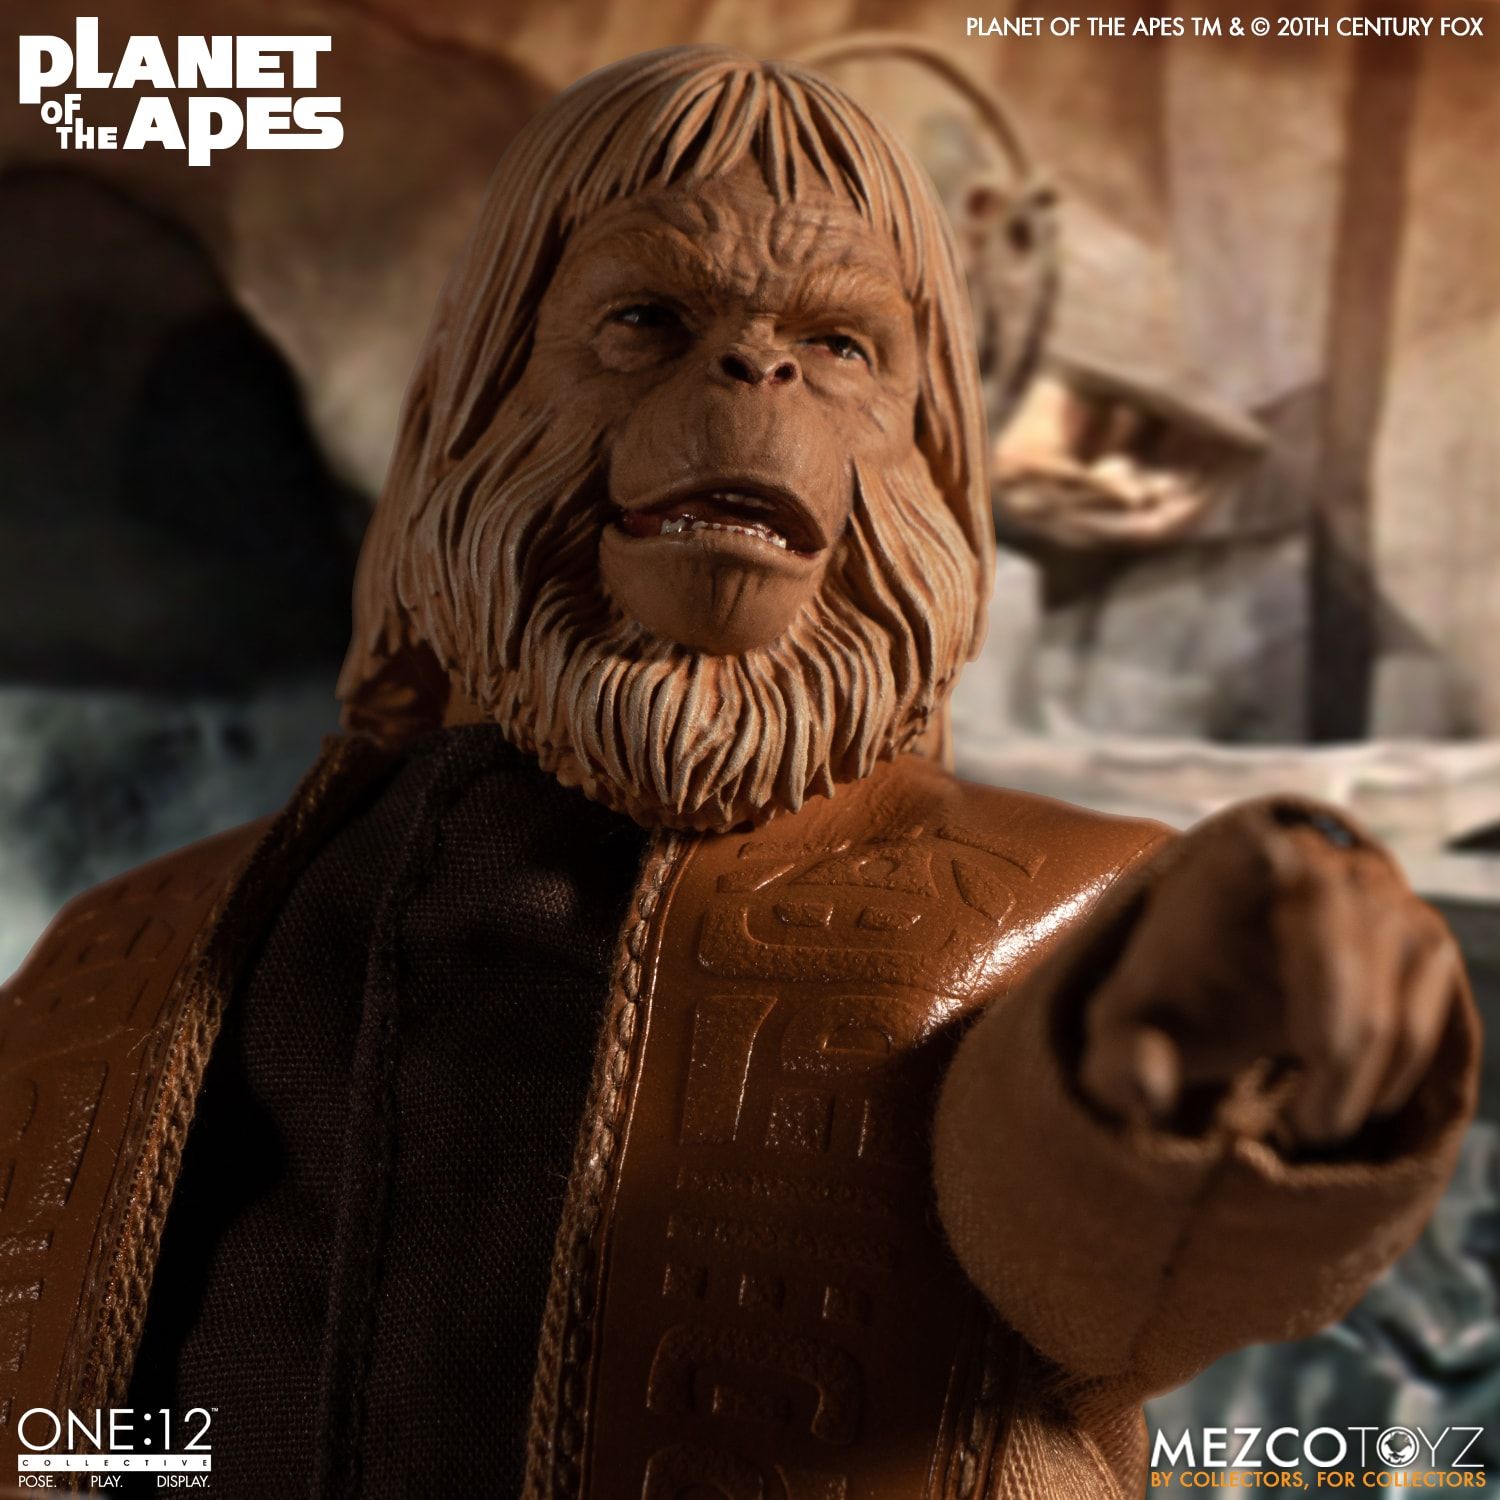 New Product: Mezco Planet of the Apes Dr. Zaius 8343